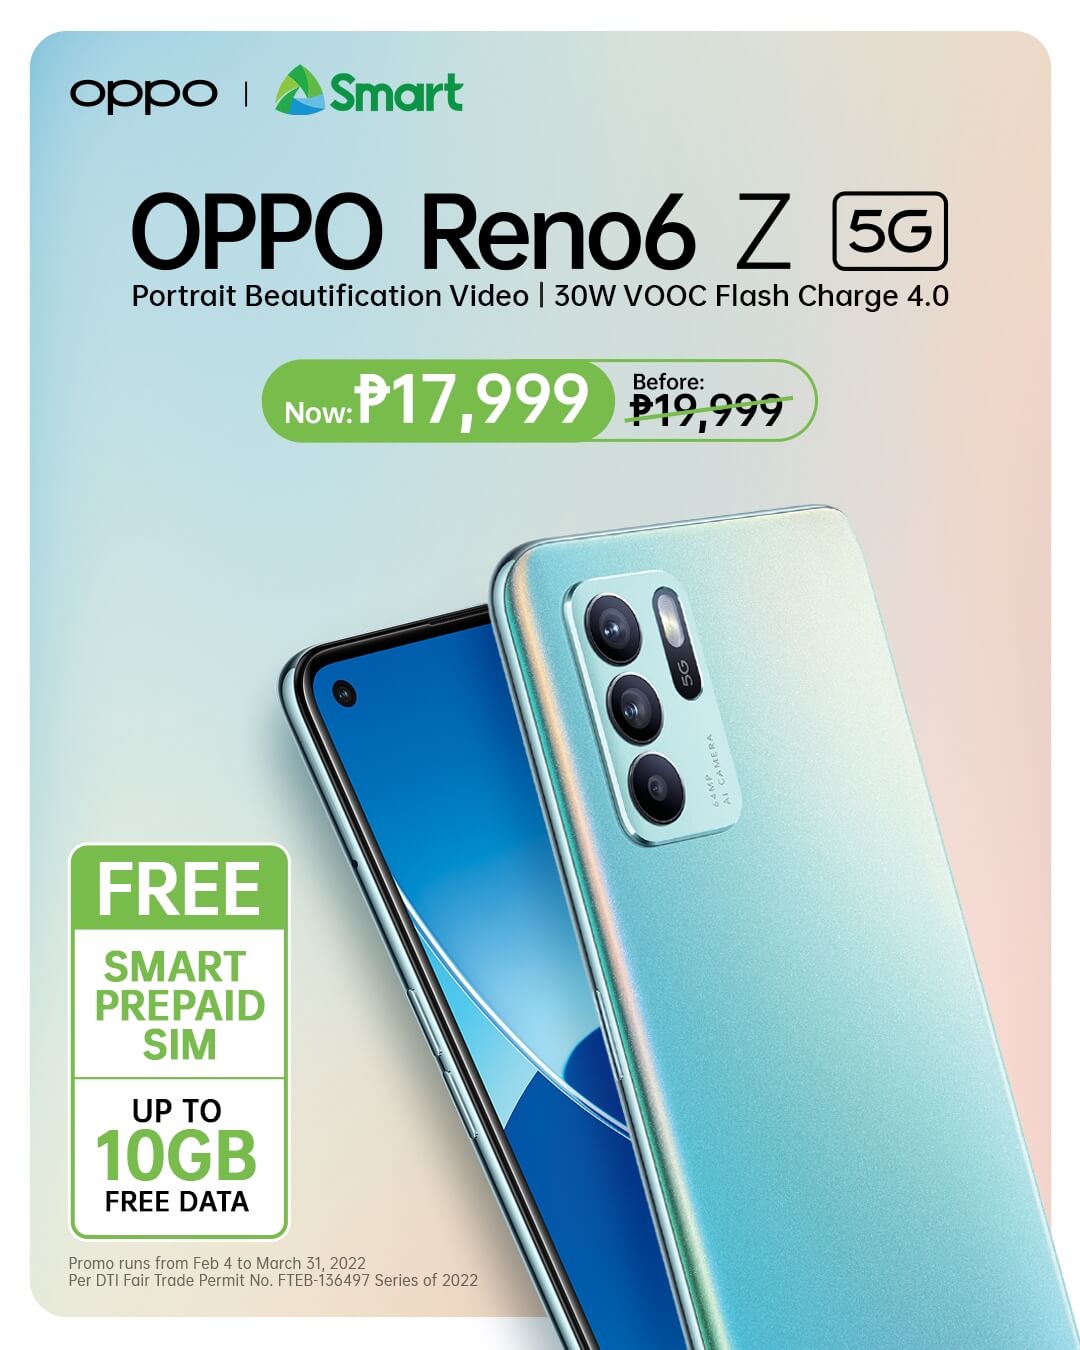 Get ready to capture your summer moments in portrait with OPPO Reno6 Z 5G, now at Php17,999 from Smart Prepaid and TNT